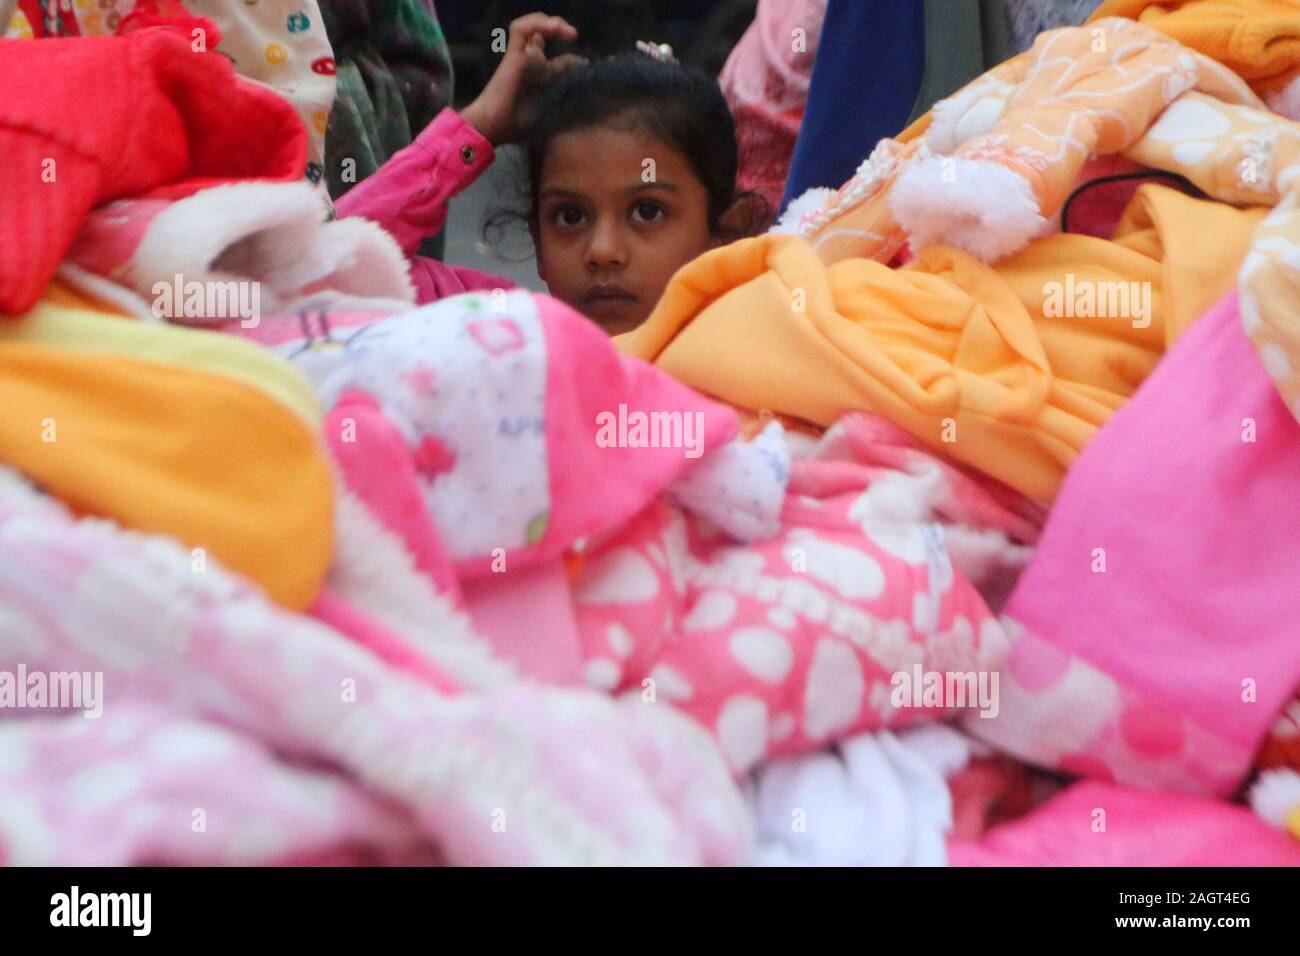 Dhaka, Bangladesh. 21st Dec, 2019. Bangladeshi citizens buy winter clothes during a cold wave in Dhaka.A biting cold spell continues to sweep across northern Bangladesh and a few other parts of the country although mercury readings point to an end to a cold wave. Credit: Sultan Mahmud Mukut/SOPA Images/ZUMA Wire/Alamy Live News Stock Photo